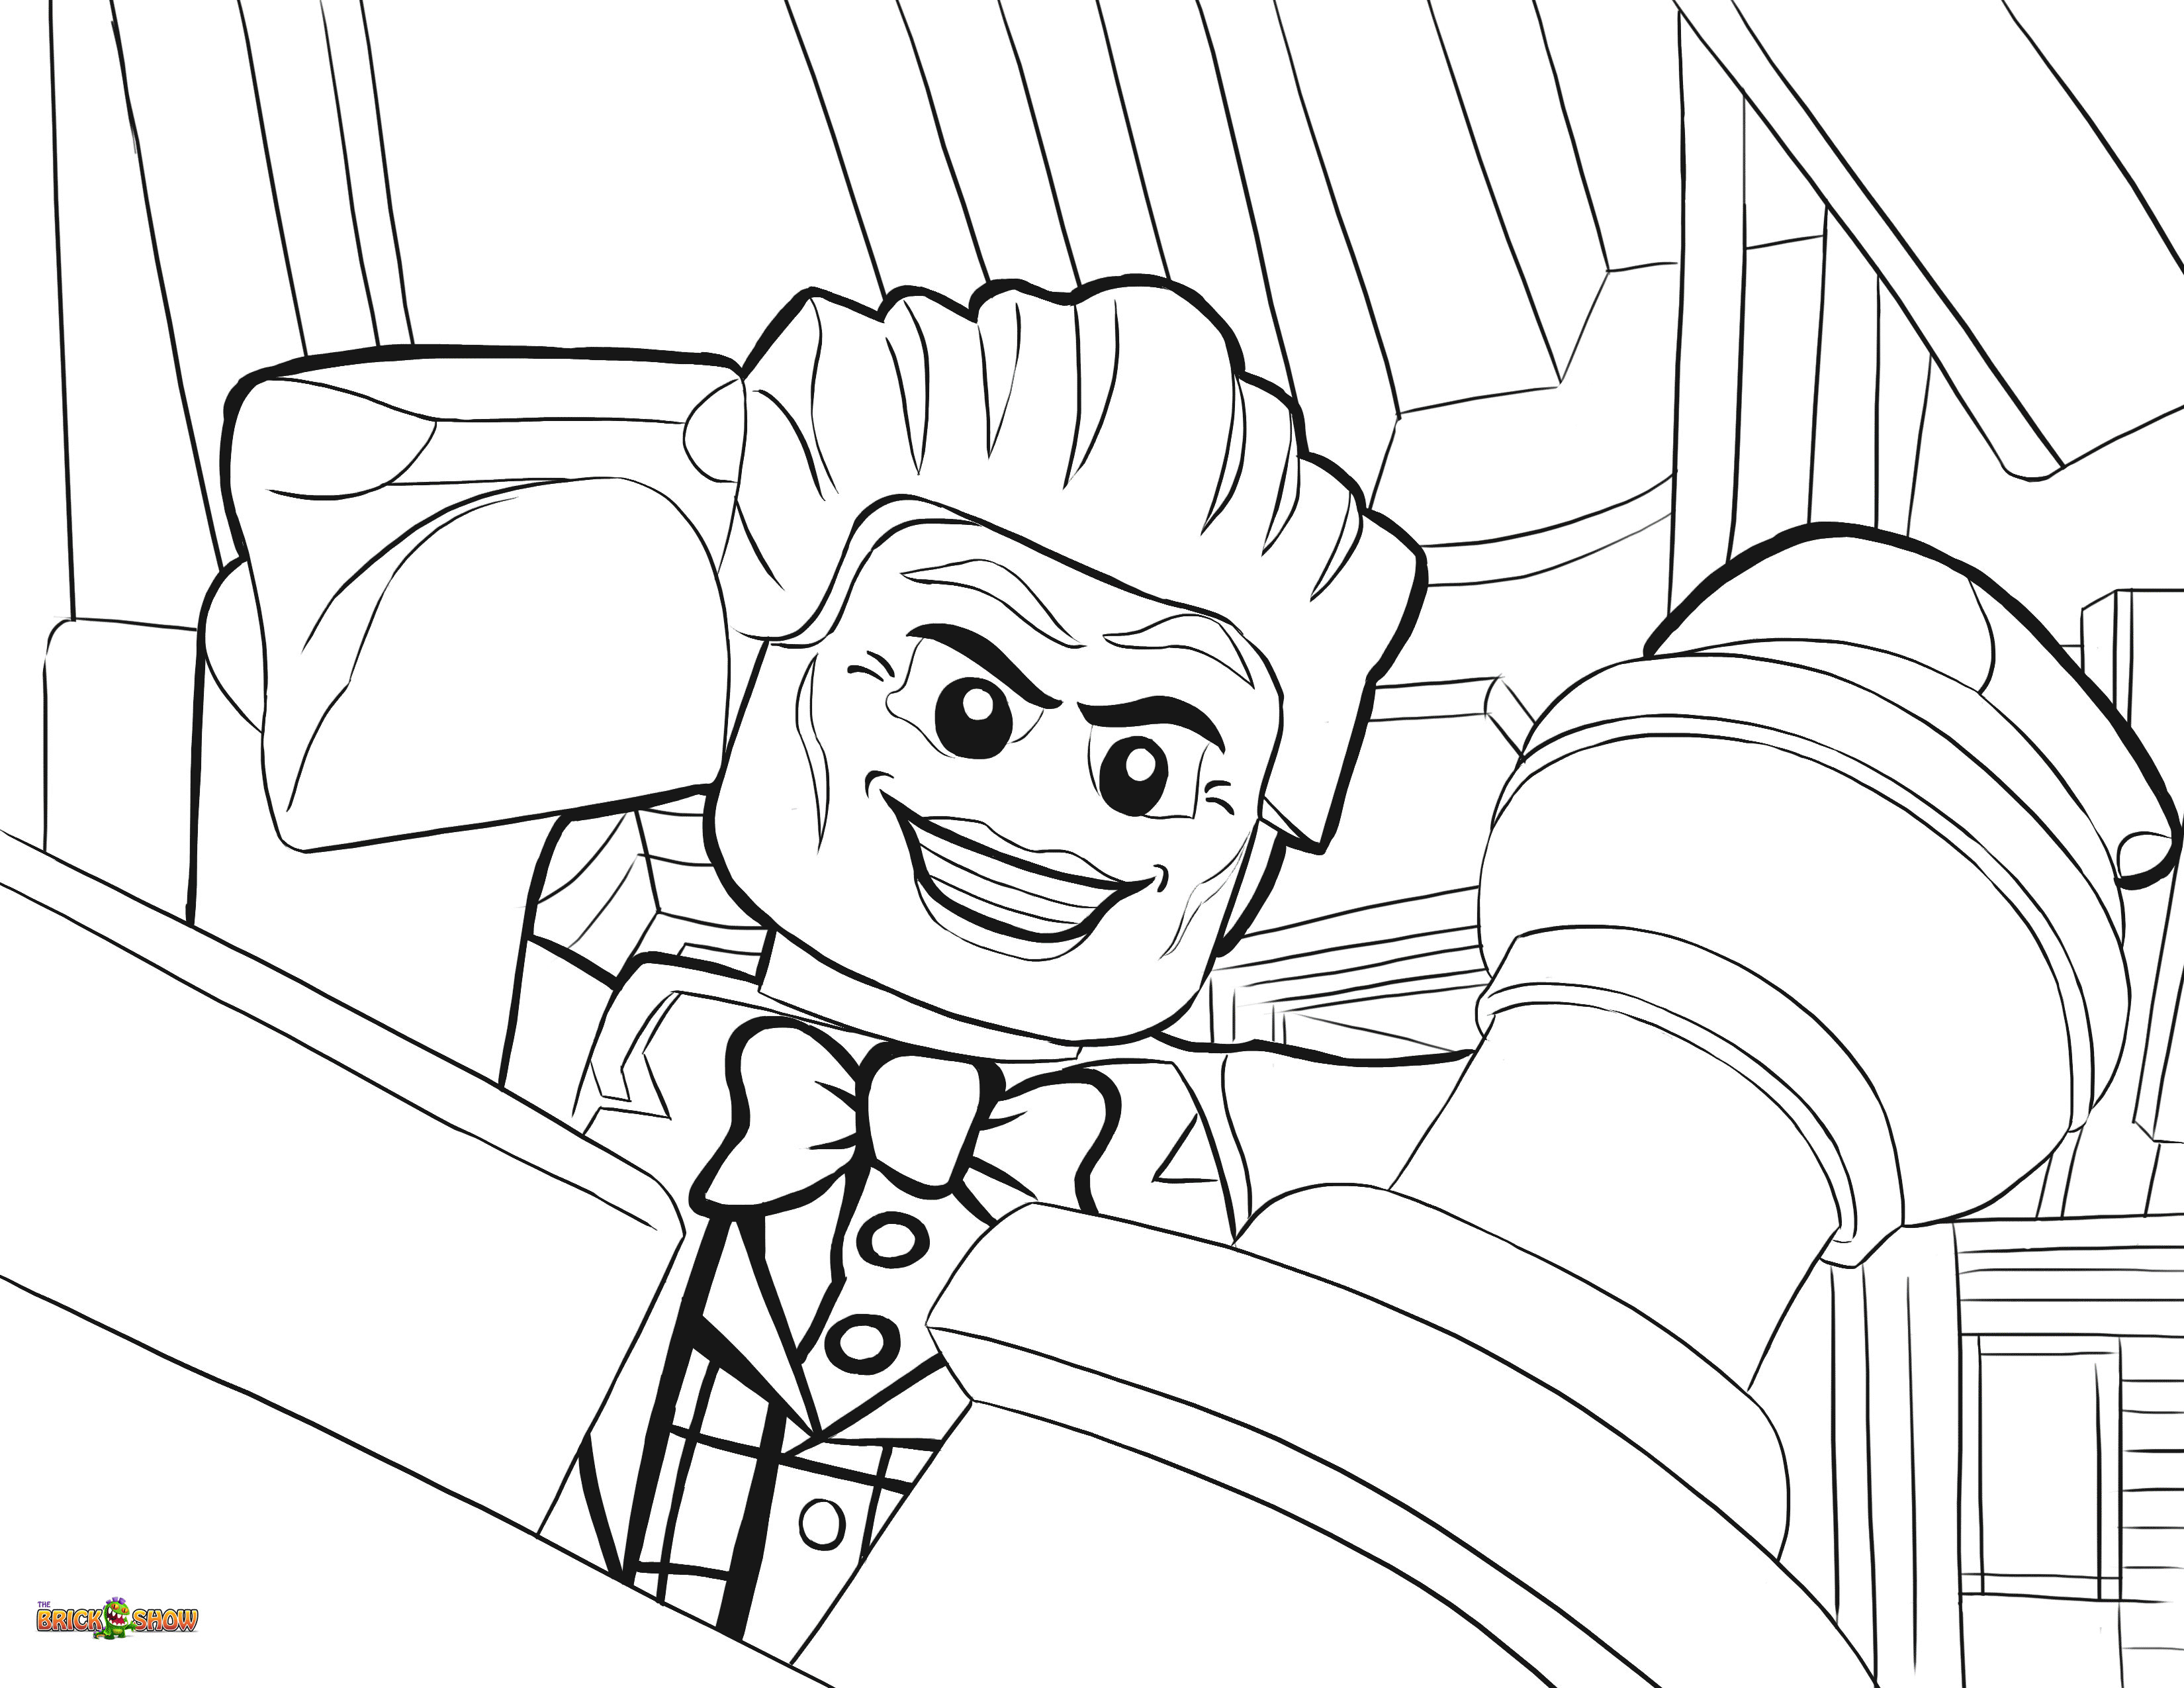 9 Pics of LEGO DC Super Heroes Coloring Pages - LEGO Joker ...